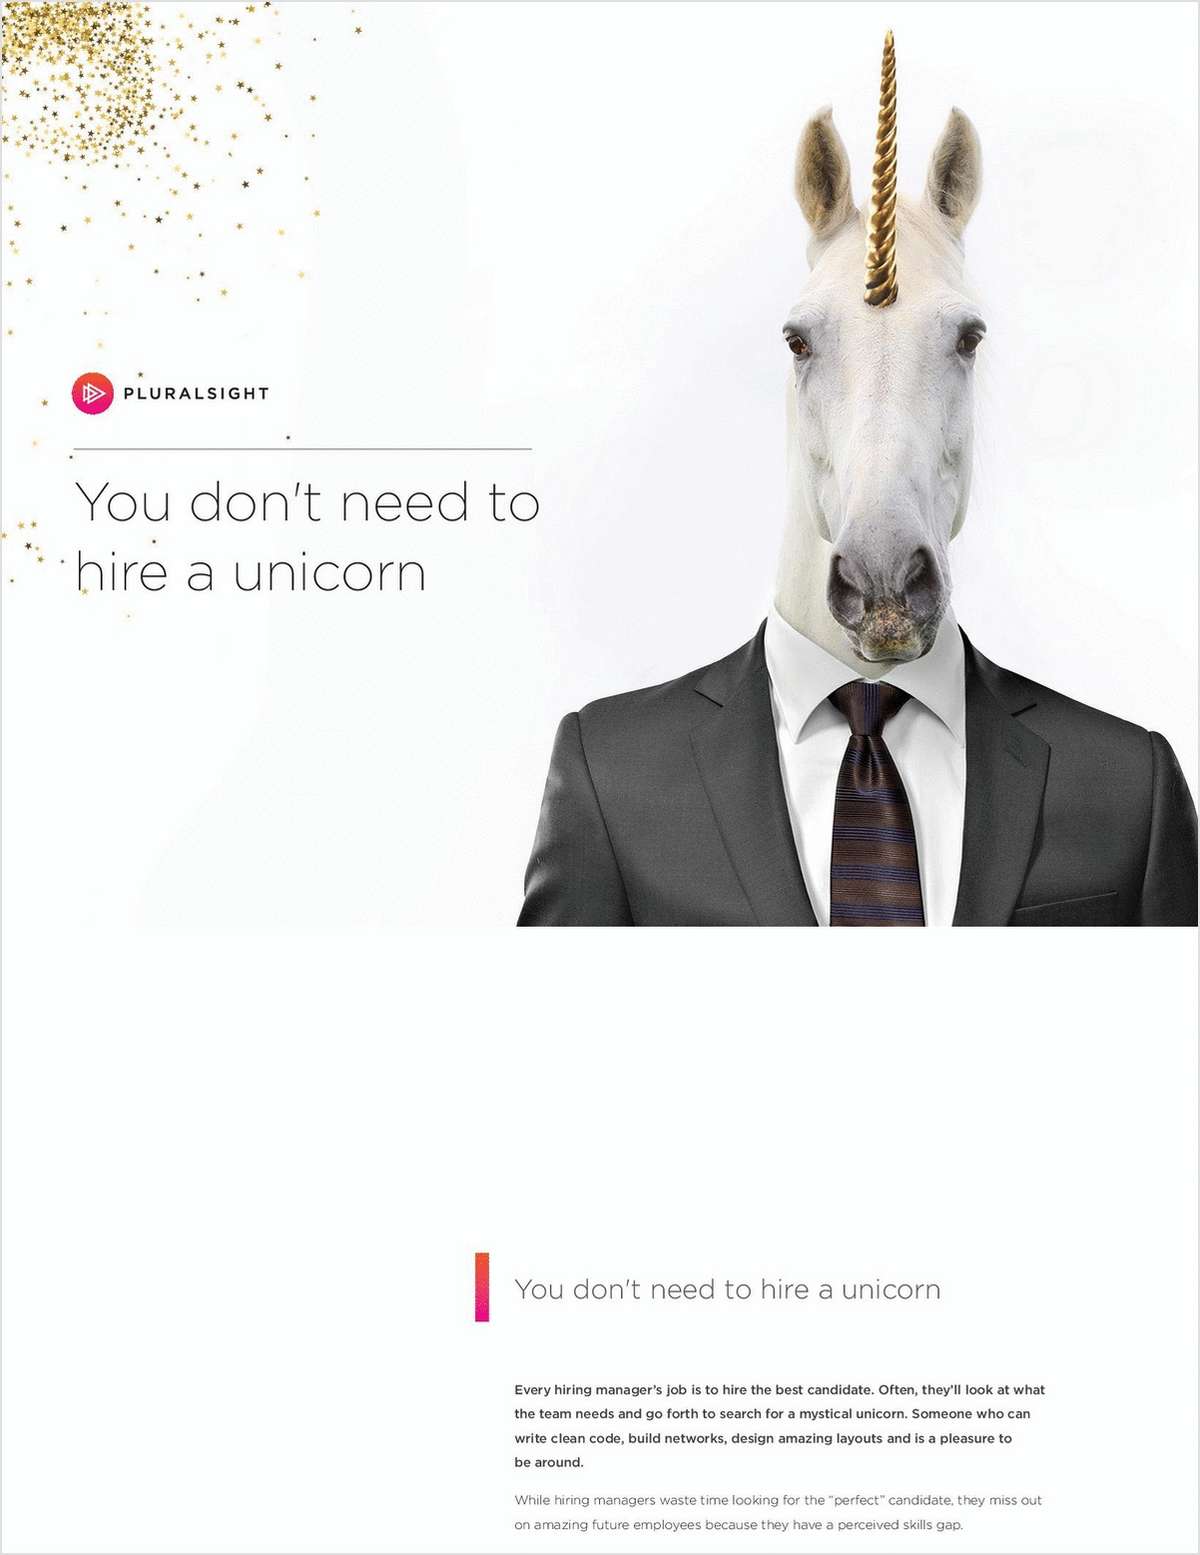 w plur152c8 - You don't need to hire a unicorn